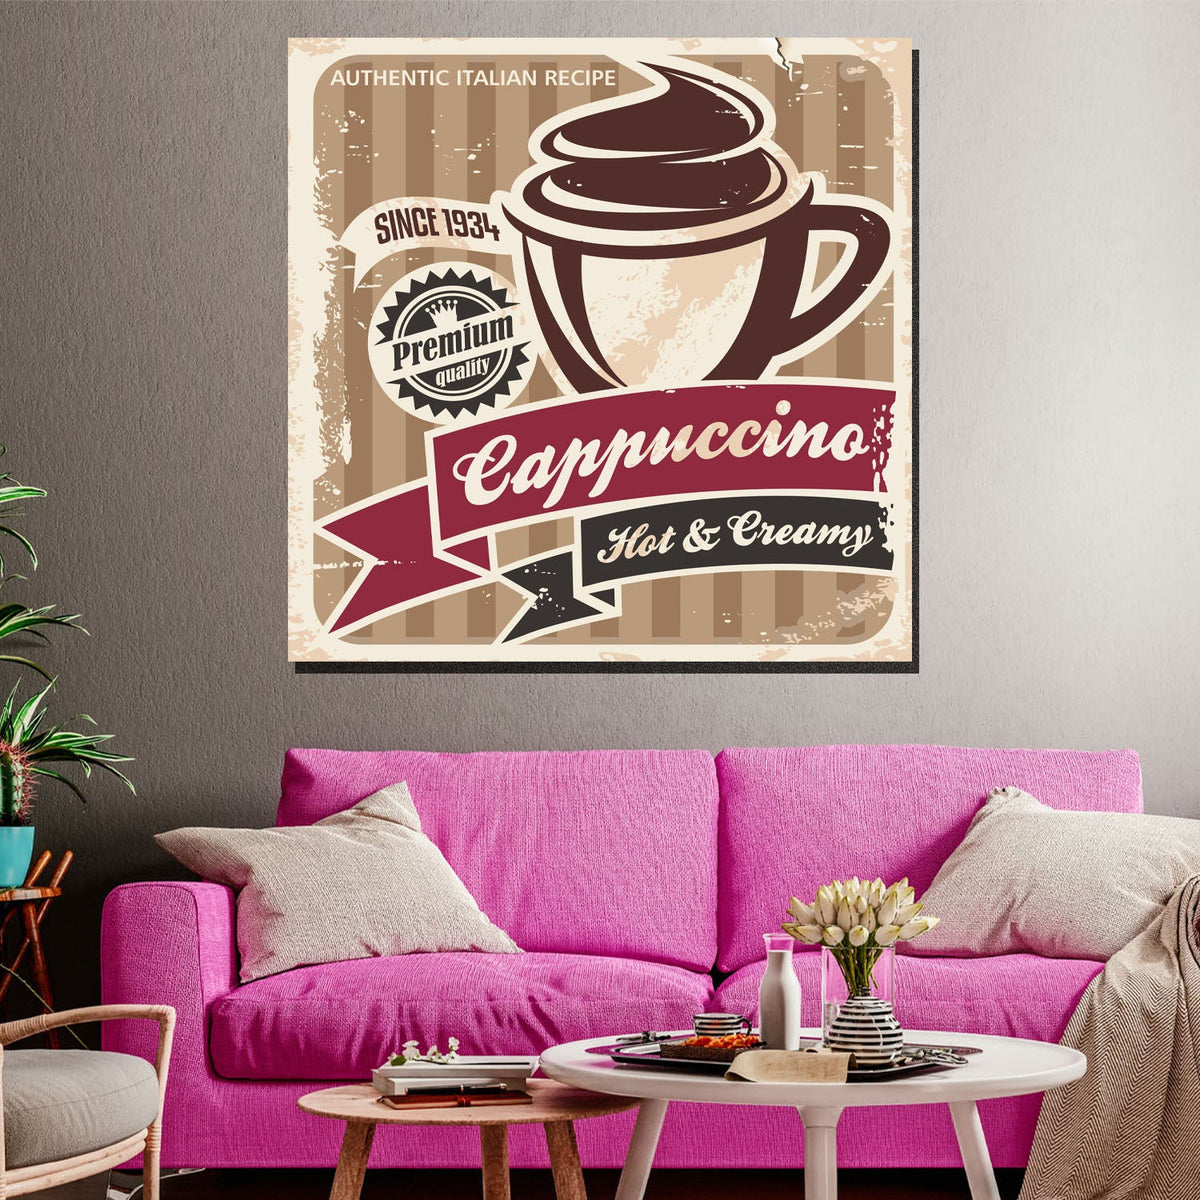 https://cdn.shopify.com/s/files/1/0387/9986/8044/products/RetroCoffeeSignCanvasArtprintStretched-4.jpg